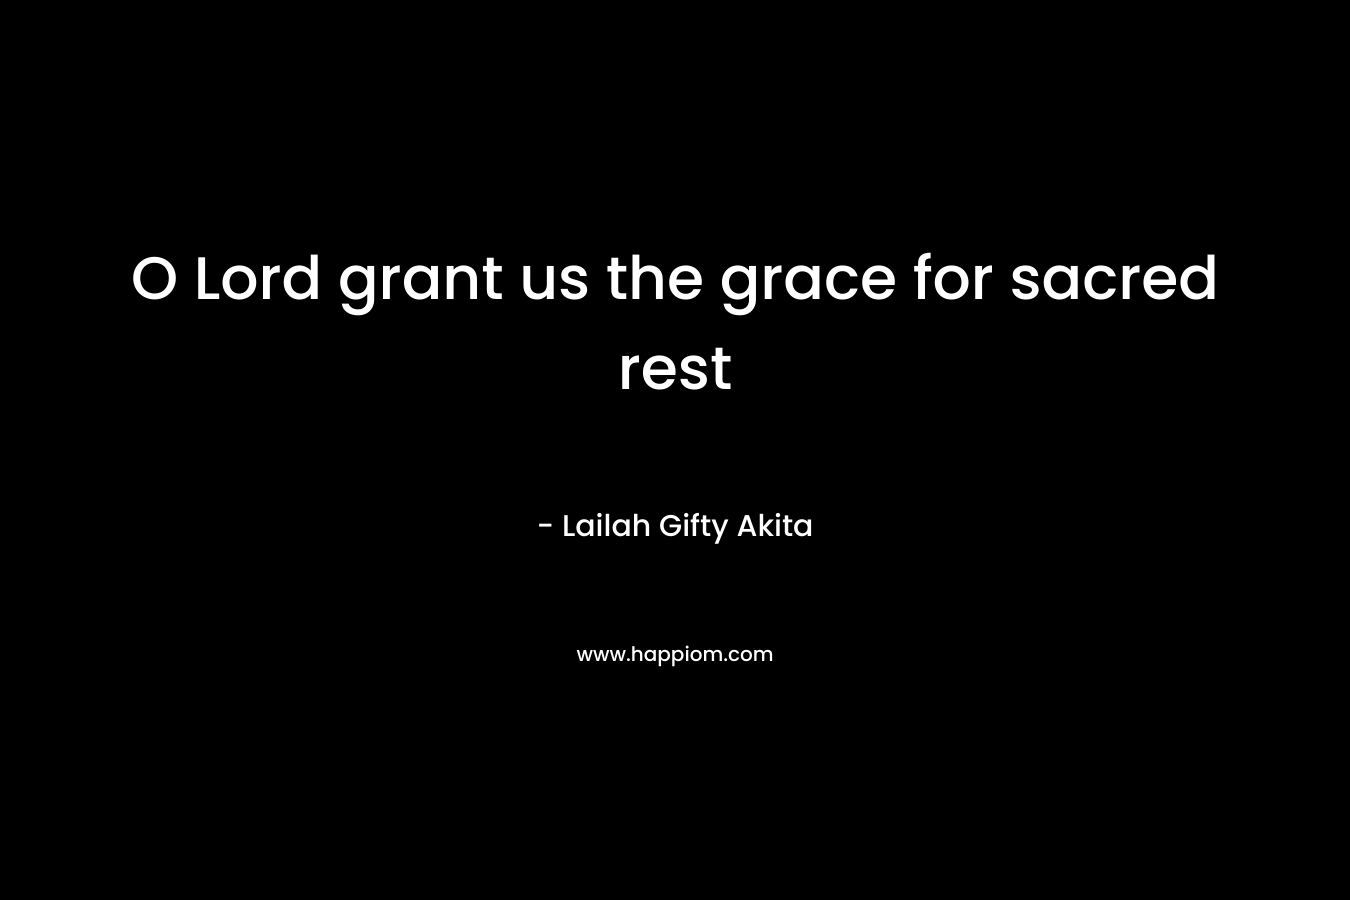 O Lord grant us the grace for sacred rest